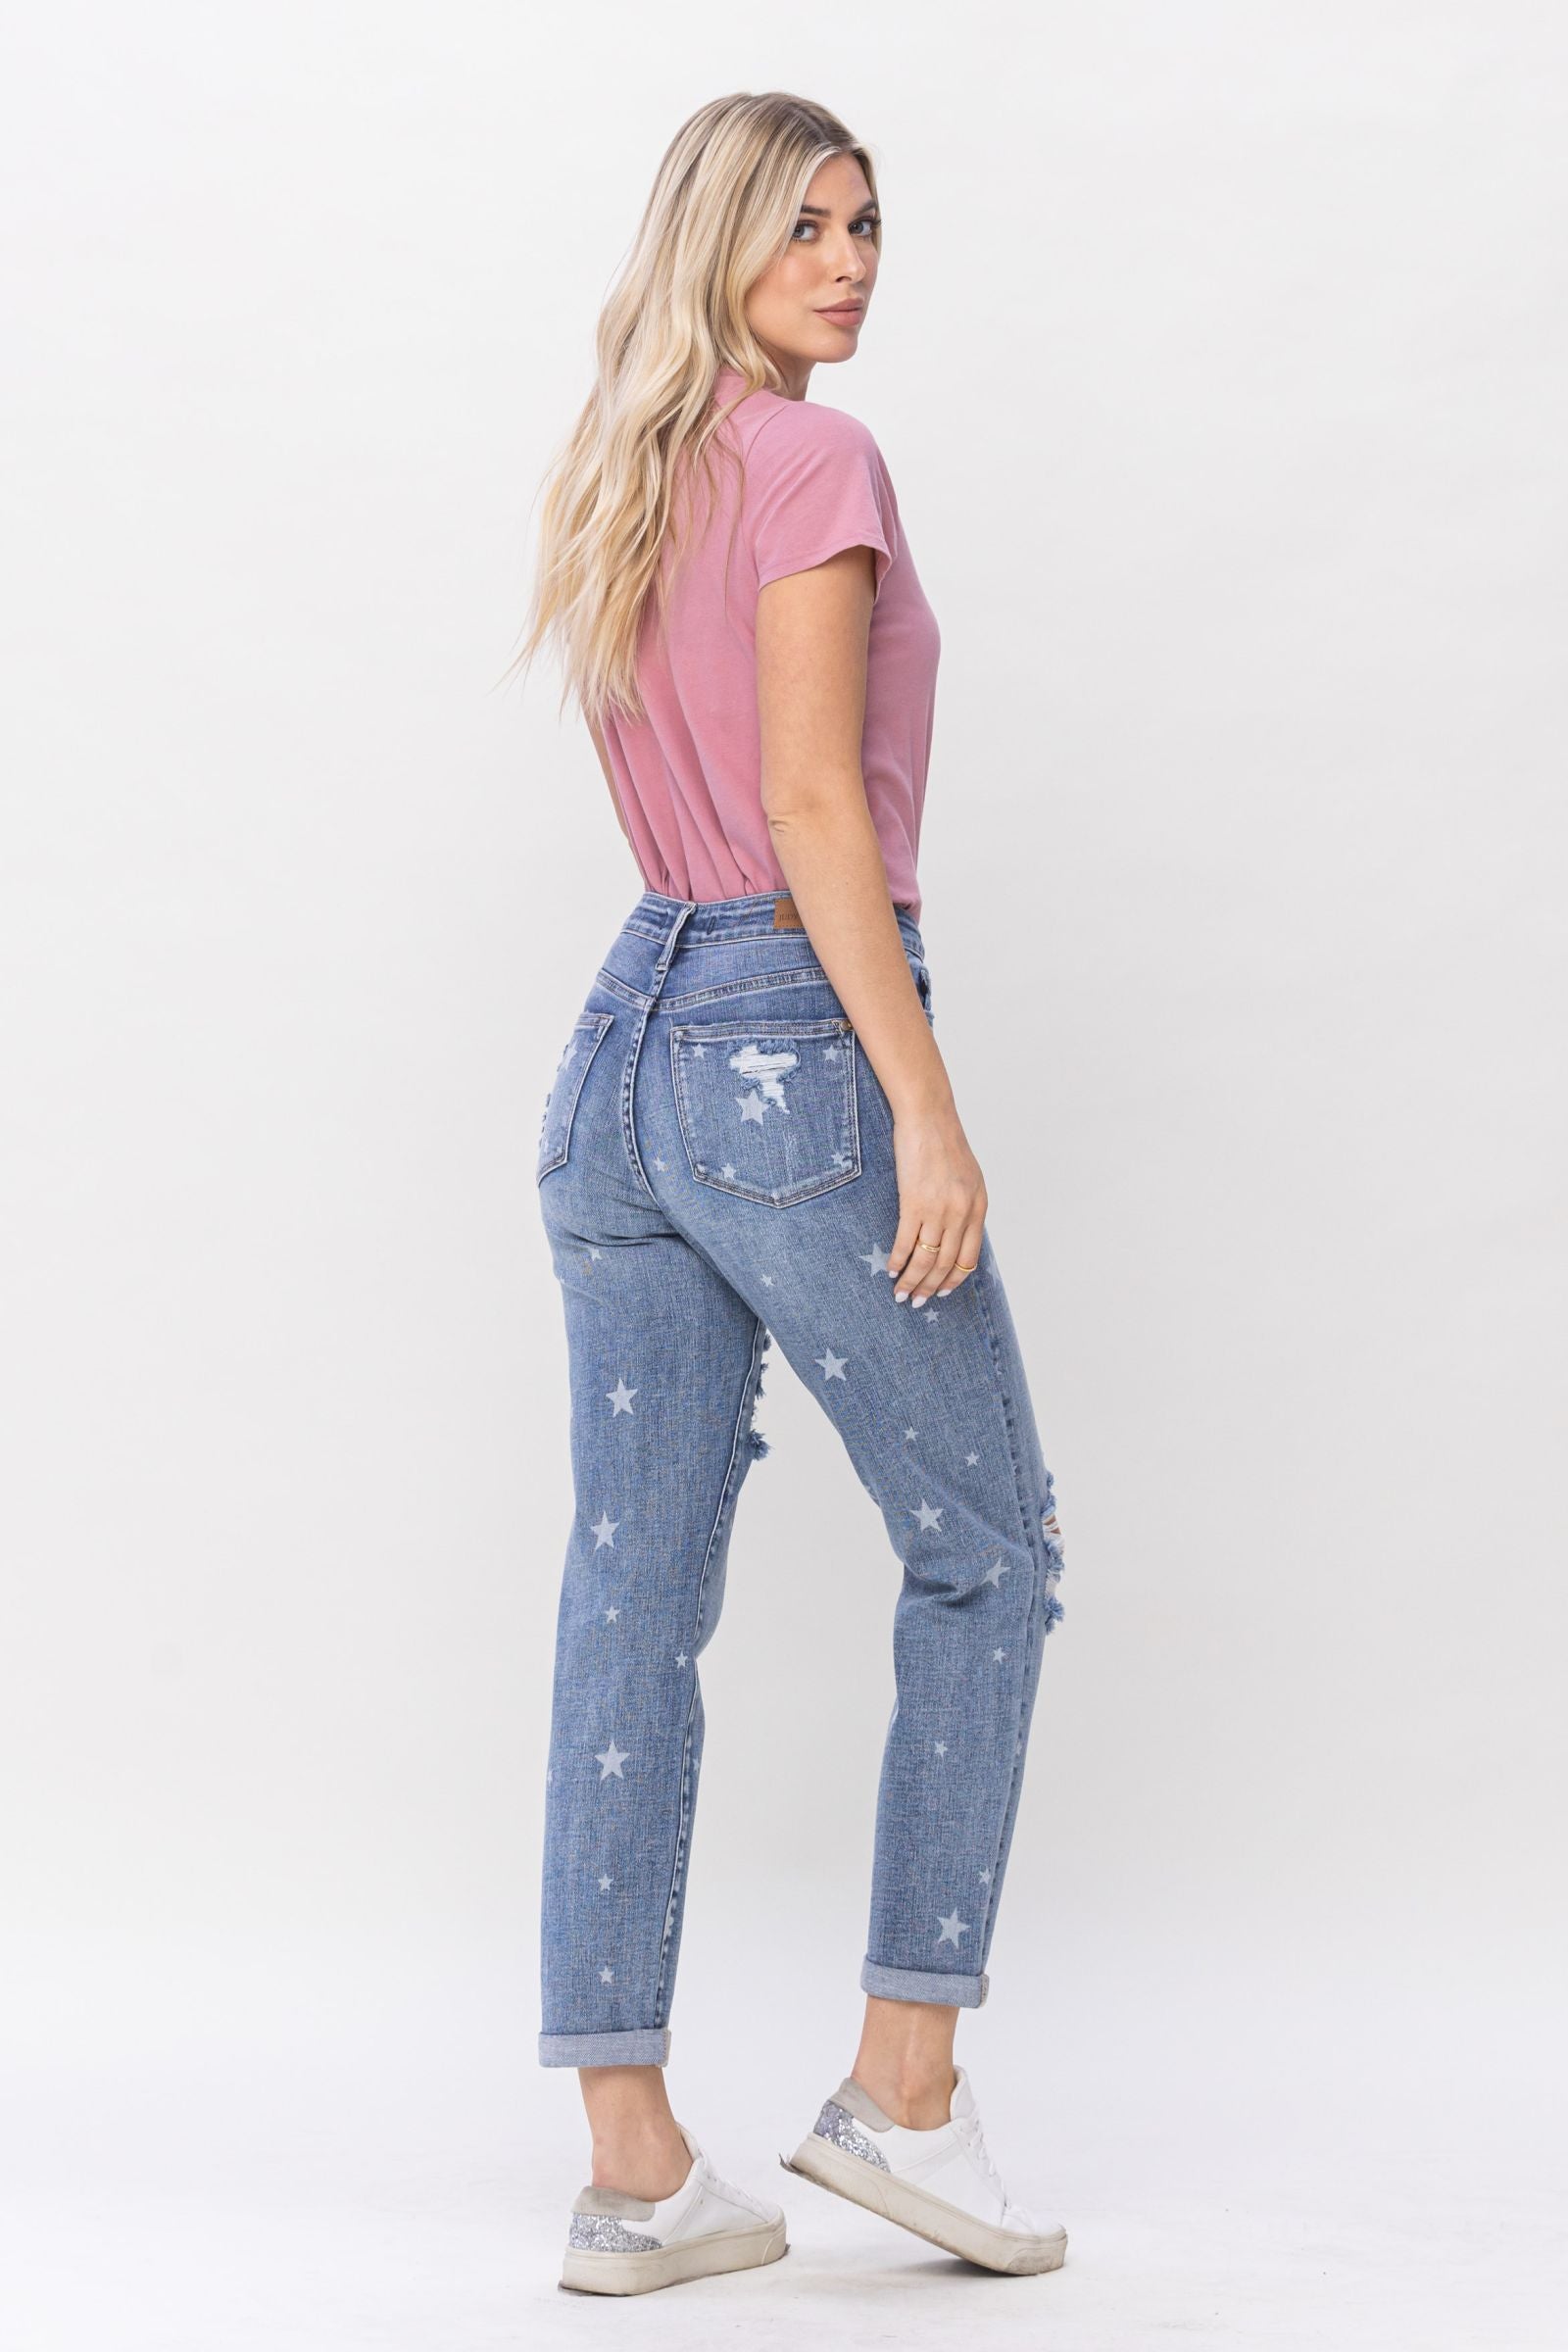 Judy Blue Star Crossed Boyfriend Jeans hi Mo – The Pink Willow Co